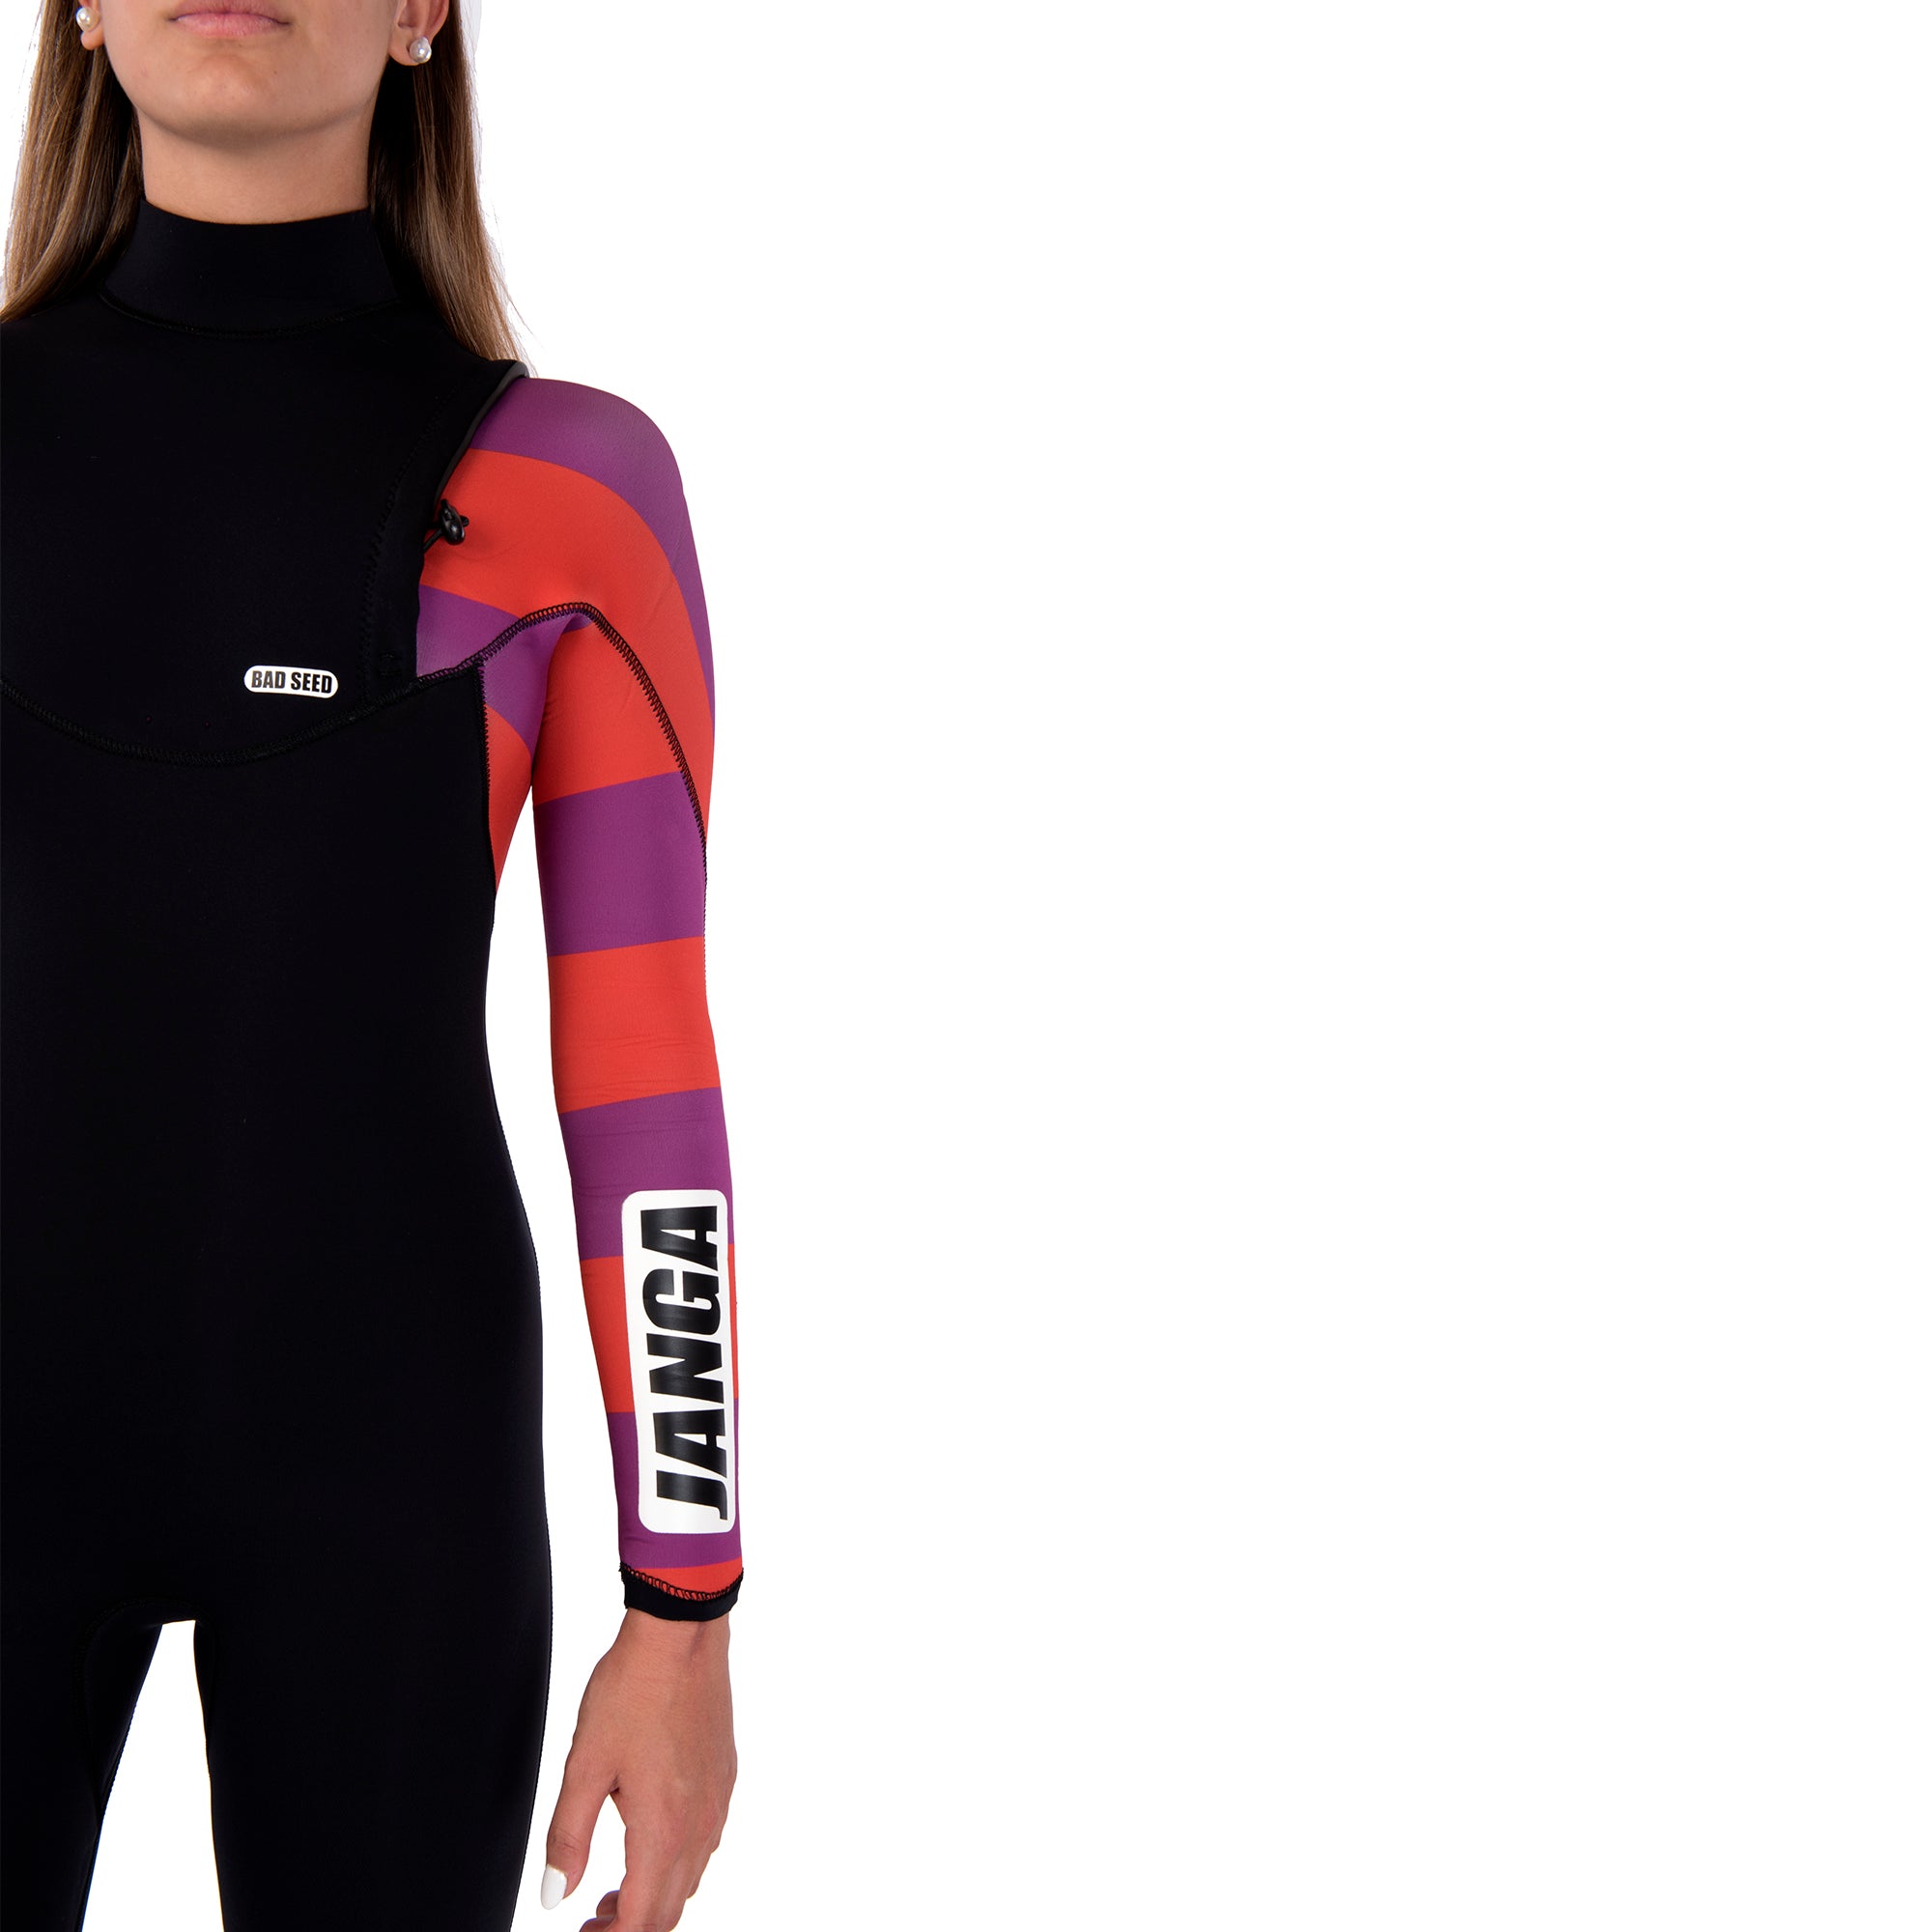 BAD SEED STRIPES WETSUIT